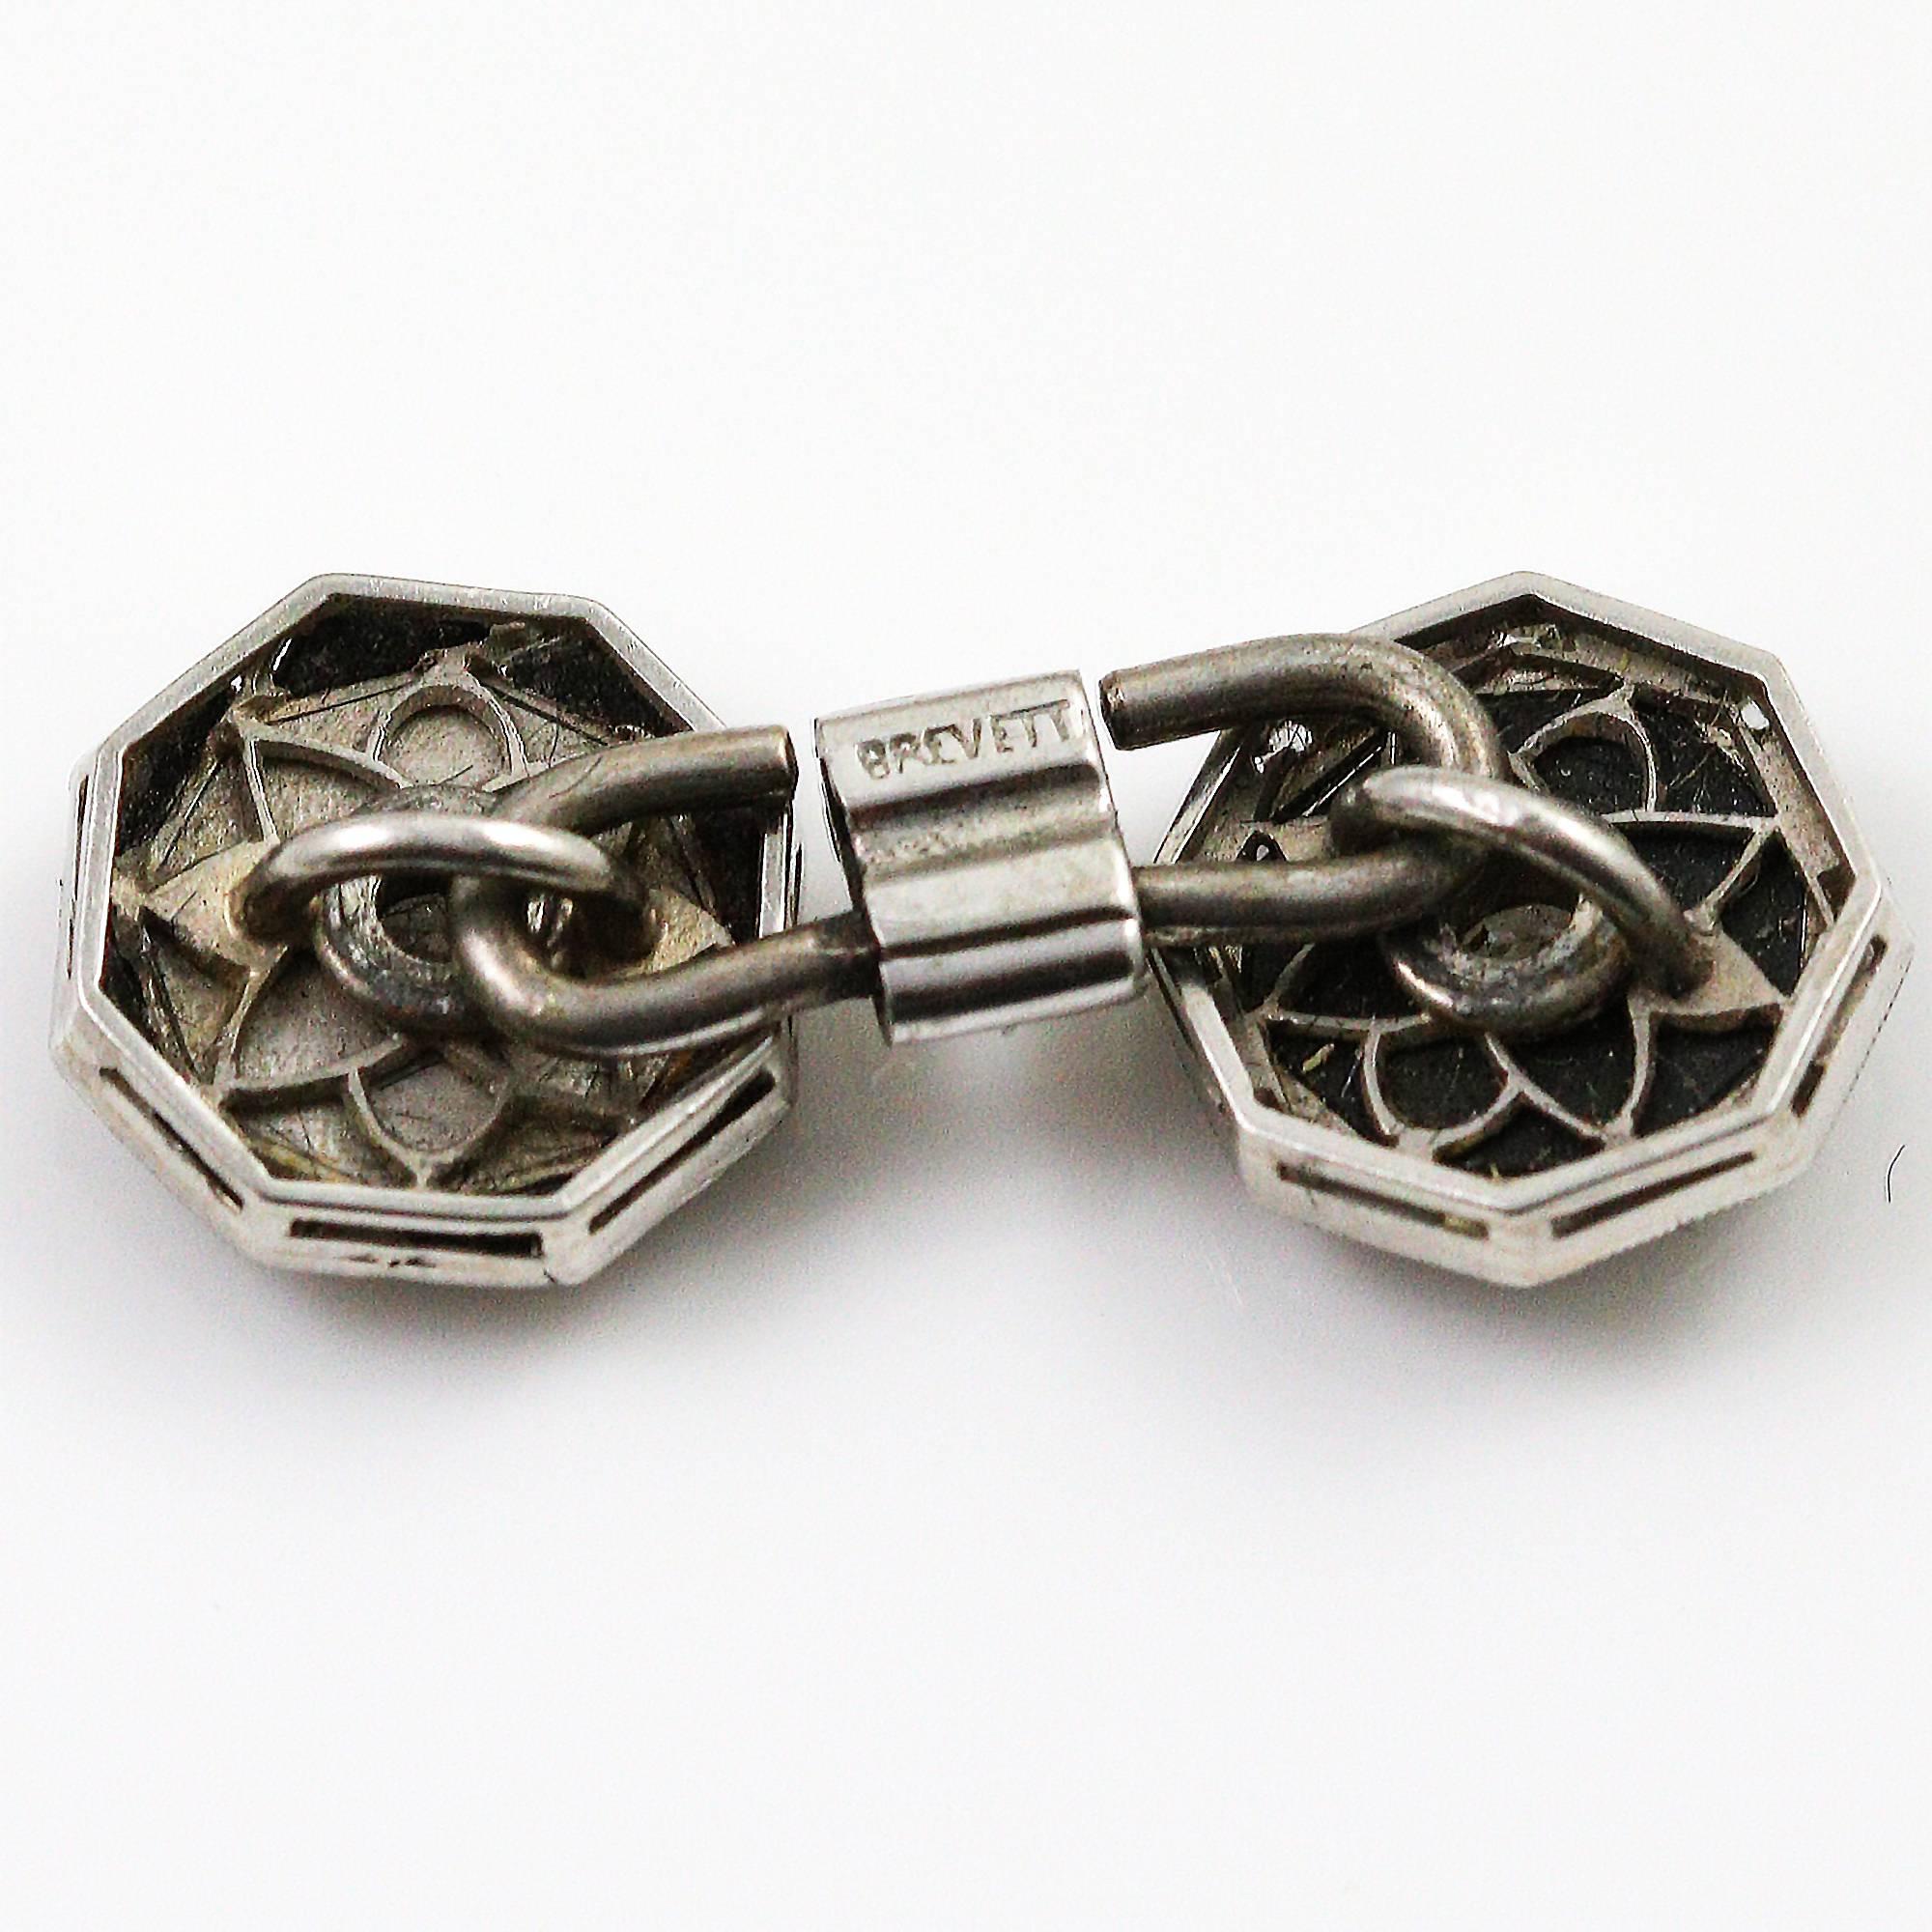 These striking reversible cufflinks offer 2 great looks. They are made in platinum and signed 